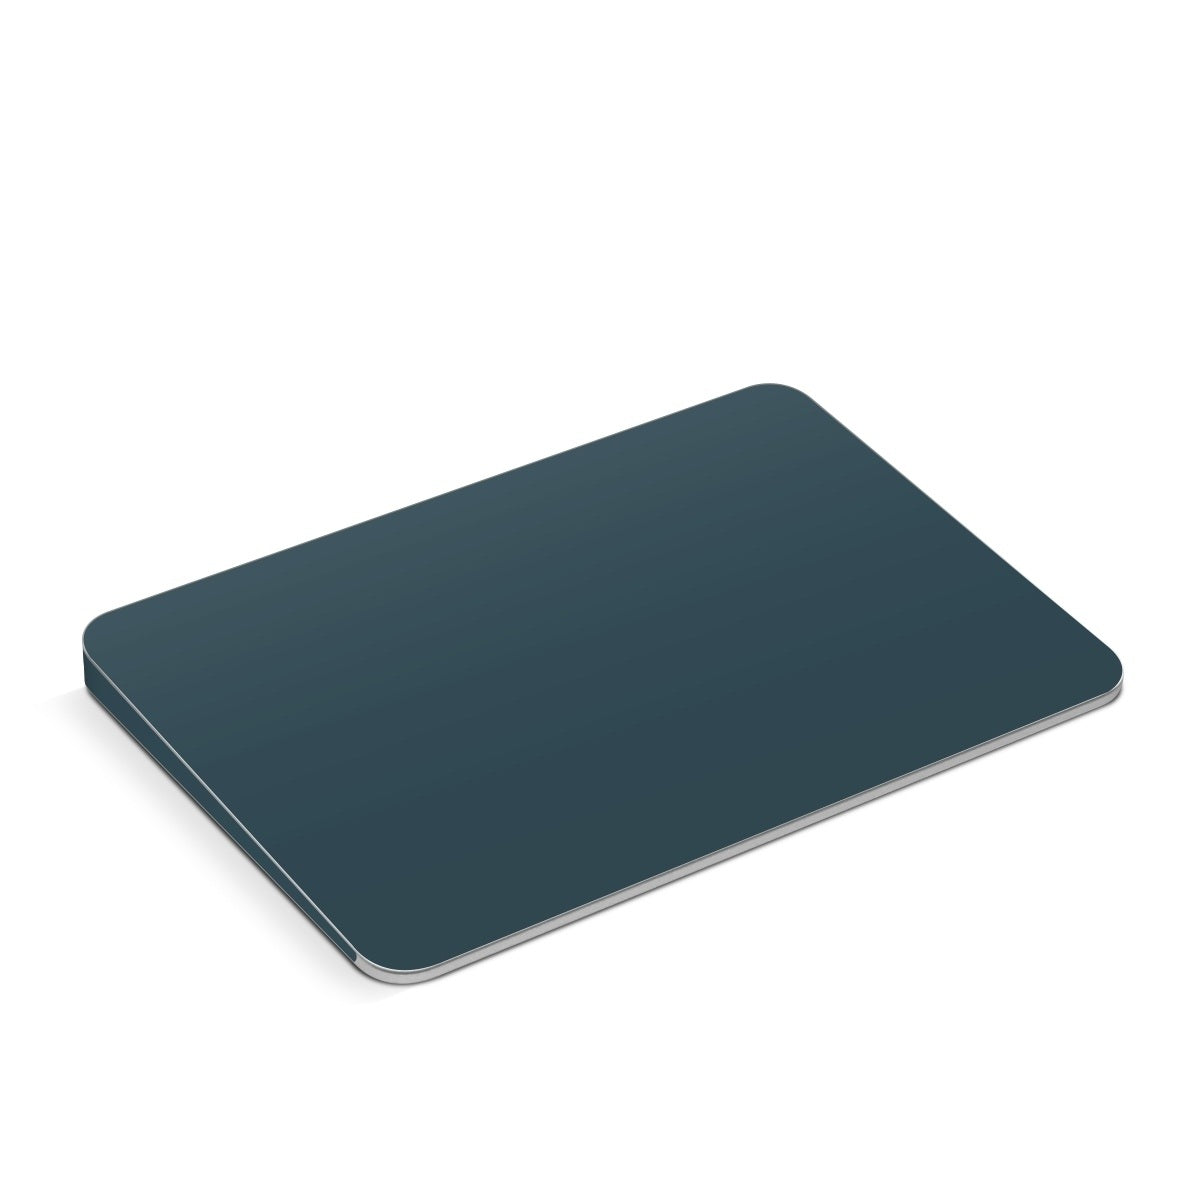 Solid State Storm - Apple Magic Trackpad Skin